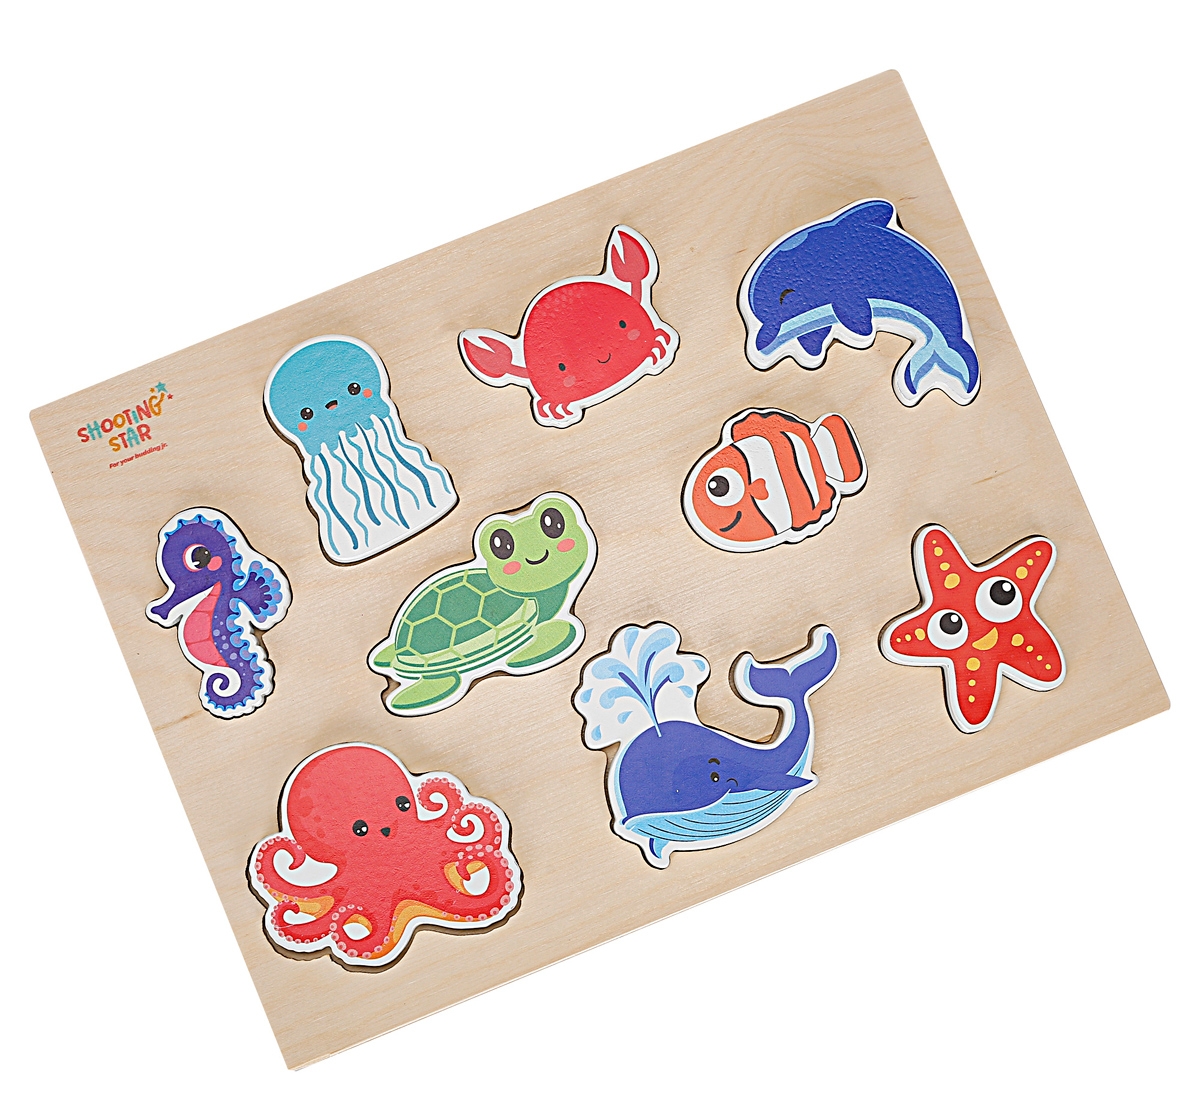 Shooting Star | Shooting Star Sea Animals Chunky 9 Piece Puzzle for kids 3Y+, Multicolour